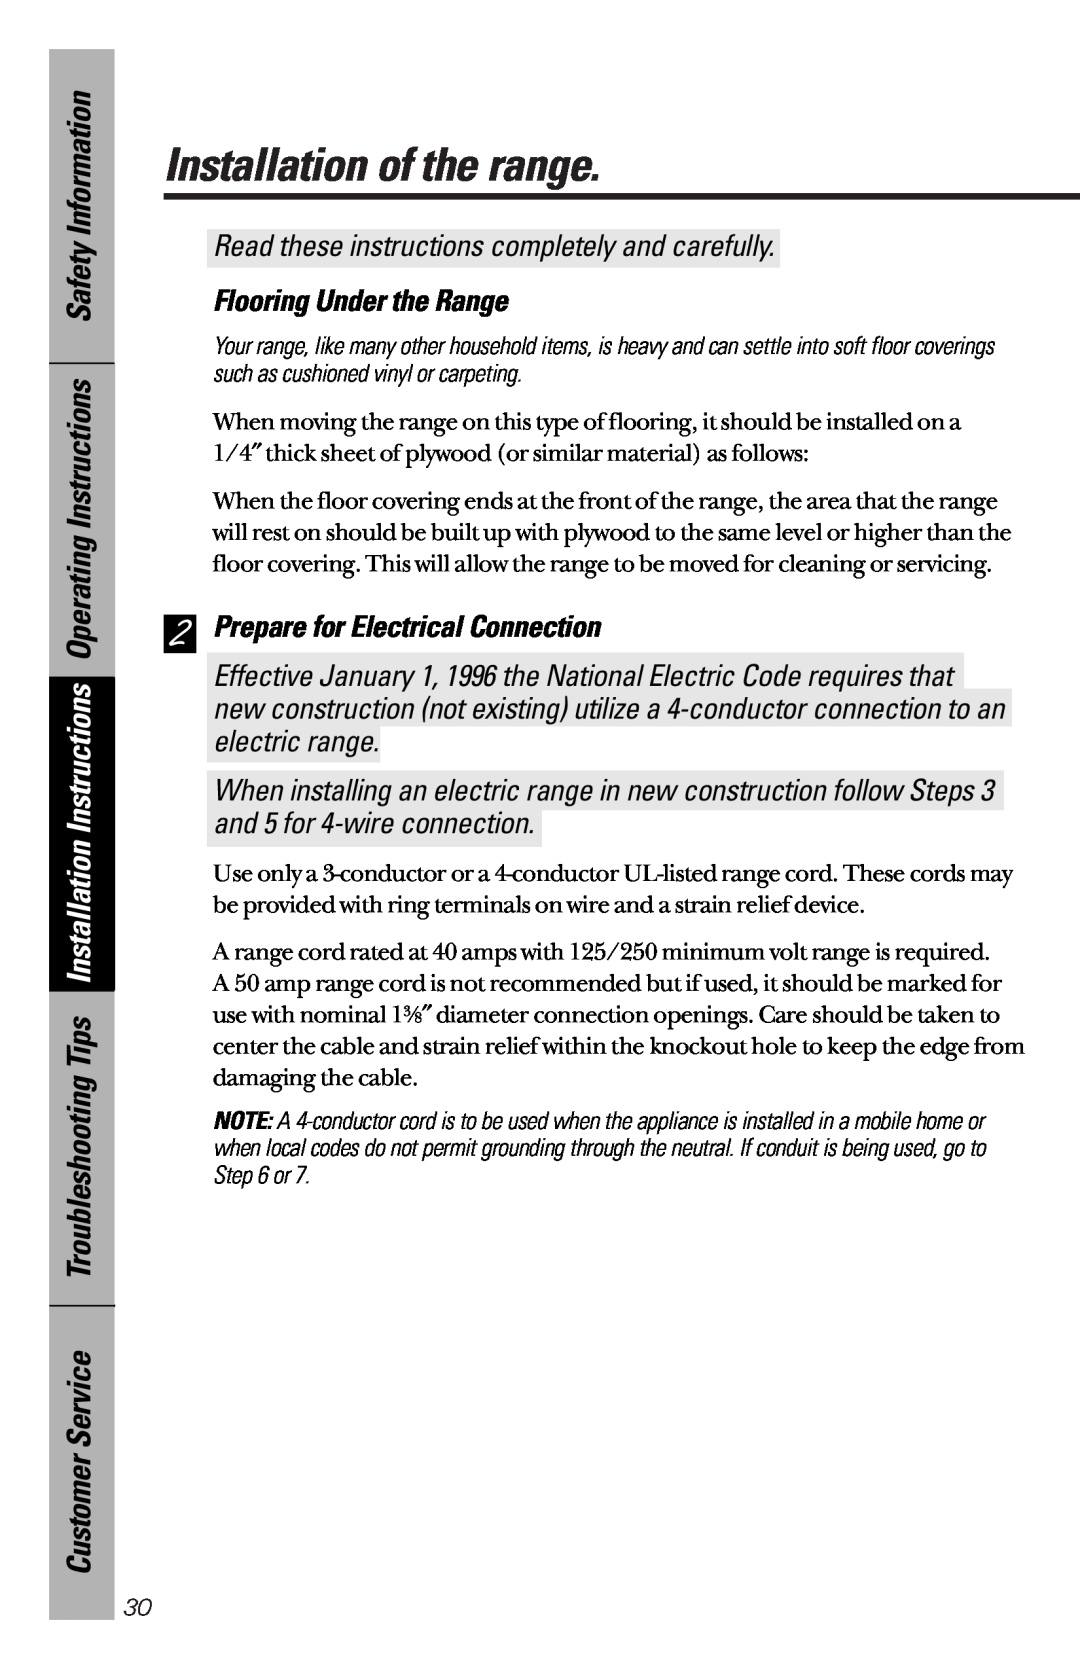 GE 164D3333P172 owner manual Flooring Under the Range, Prepare for Electrical Connection, Installation of the range 